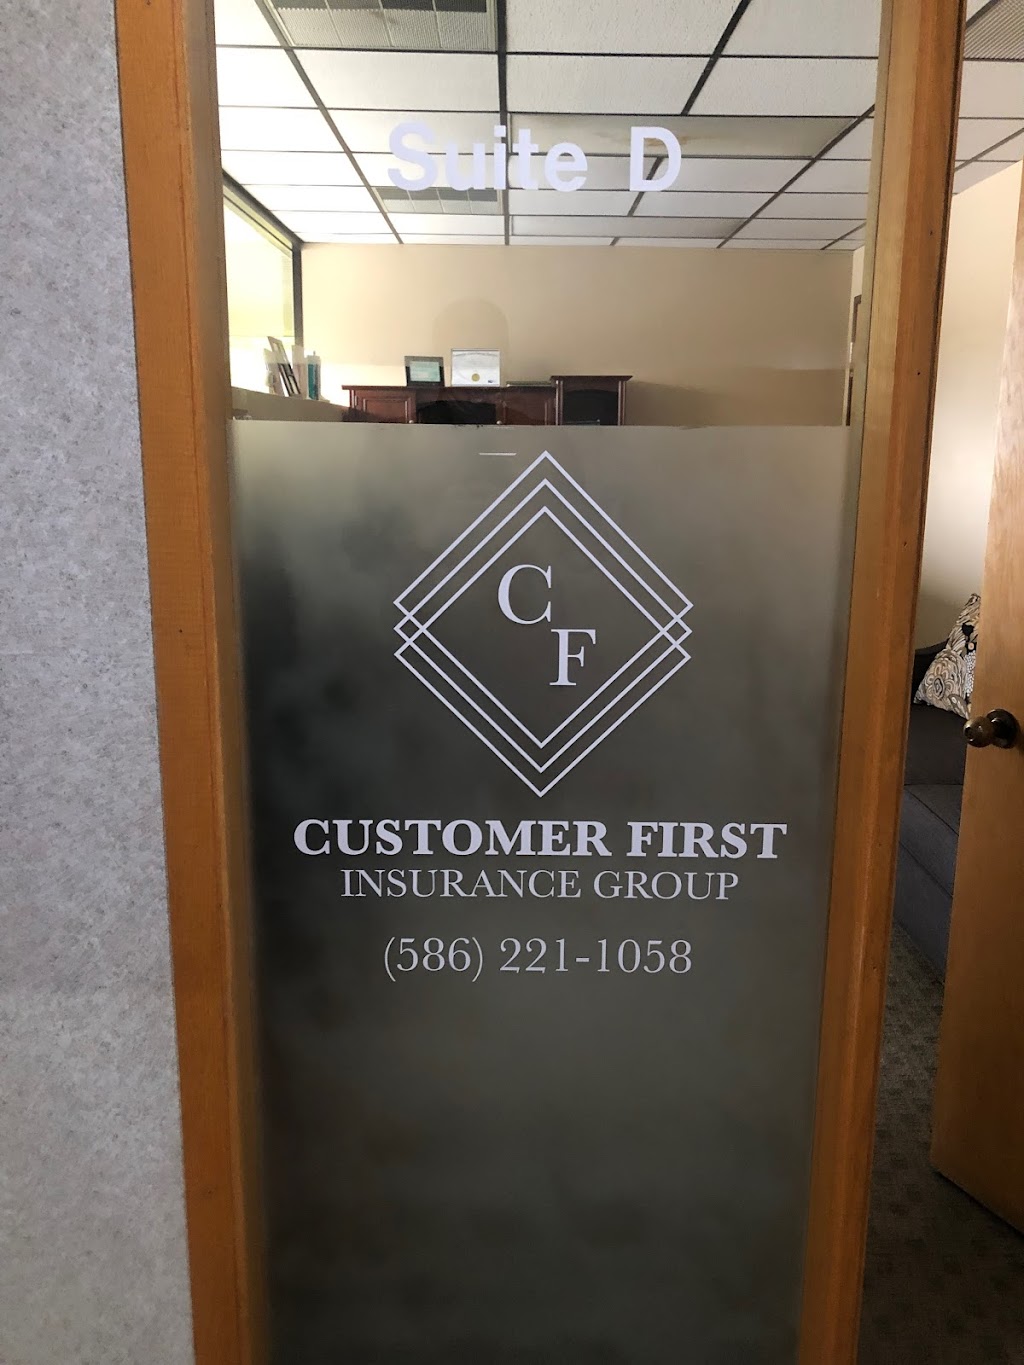 Customers First Insurance Group | 49696 Gratiot Ave, New Baltimore, MI 48051, USA | Phone: (586) 221-6870